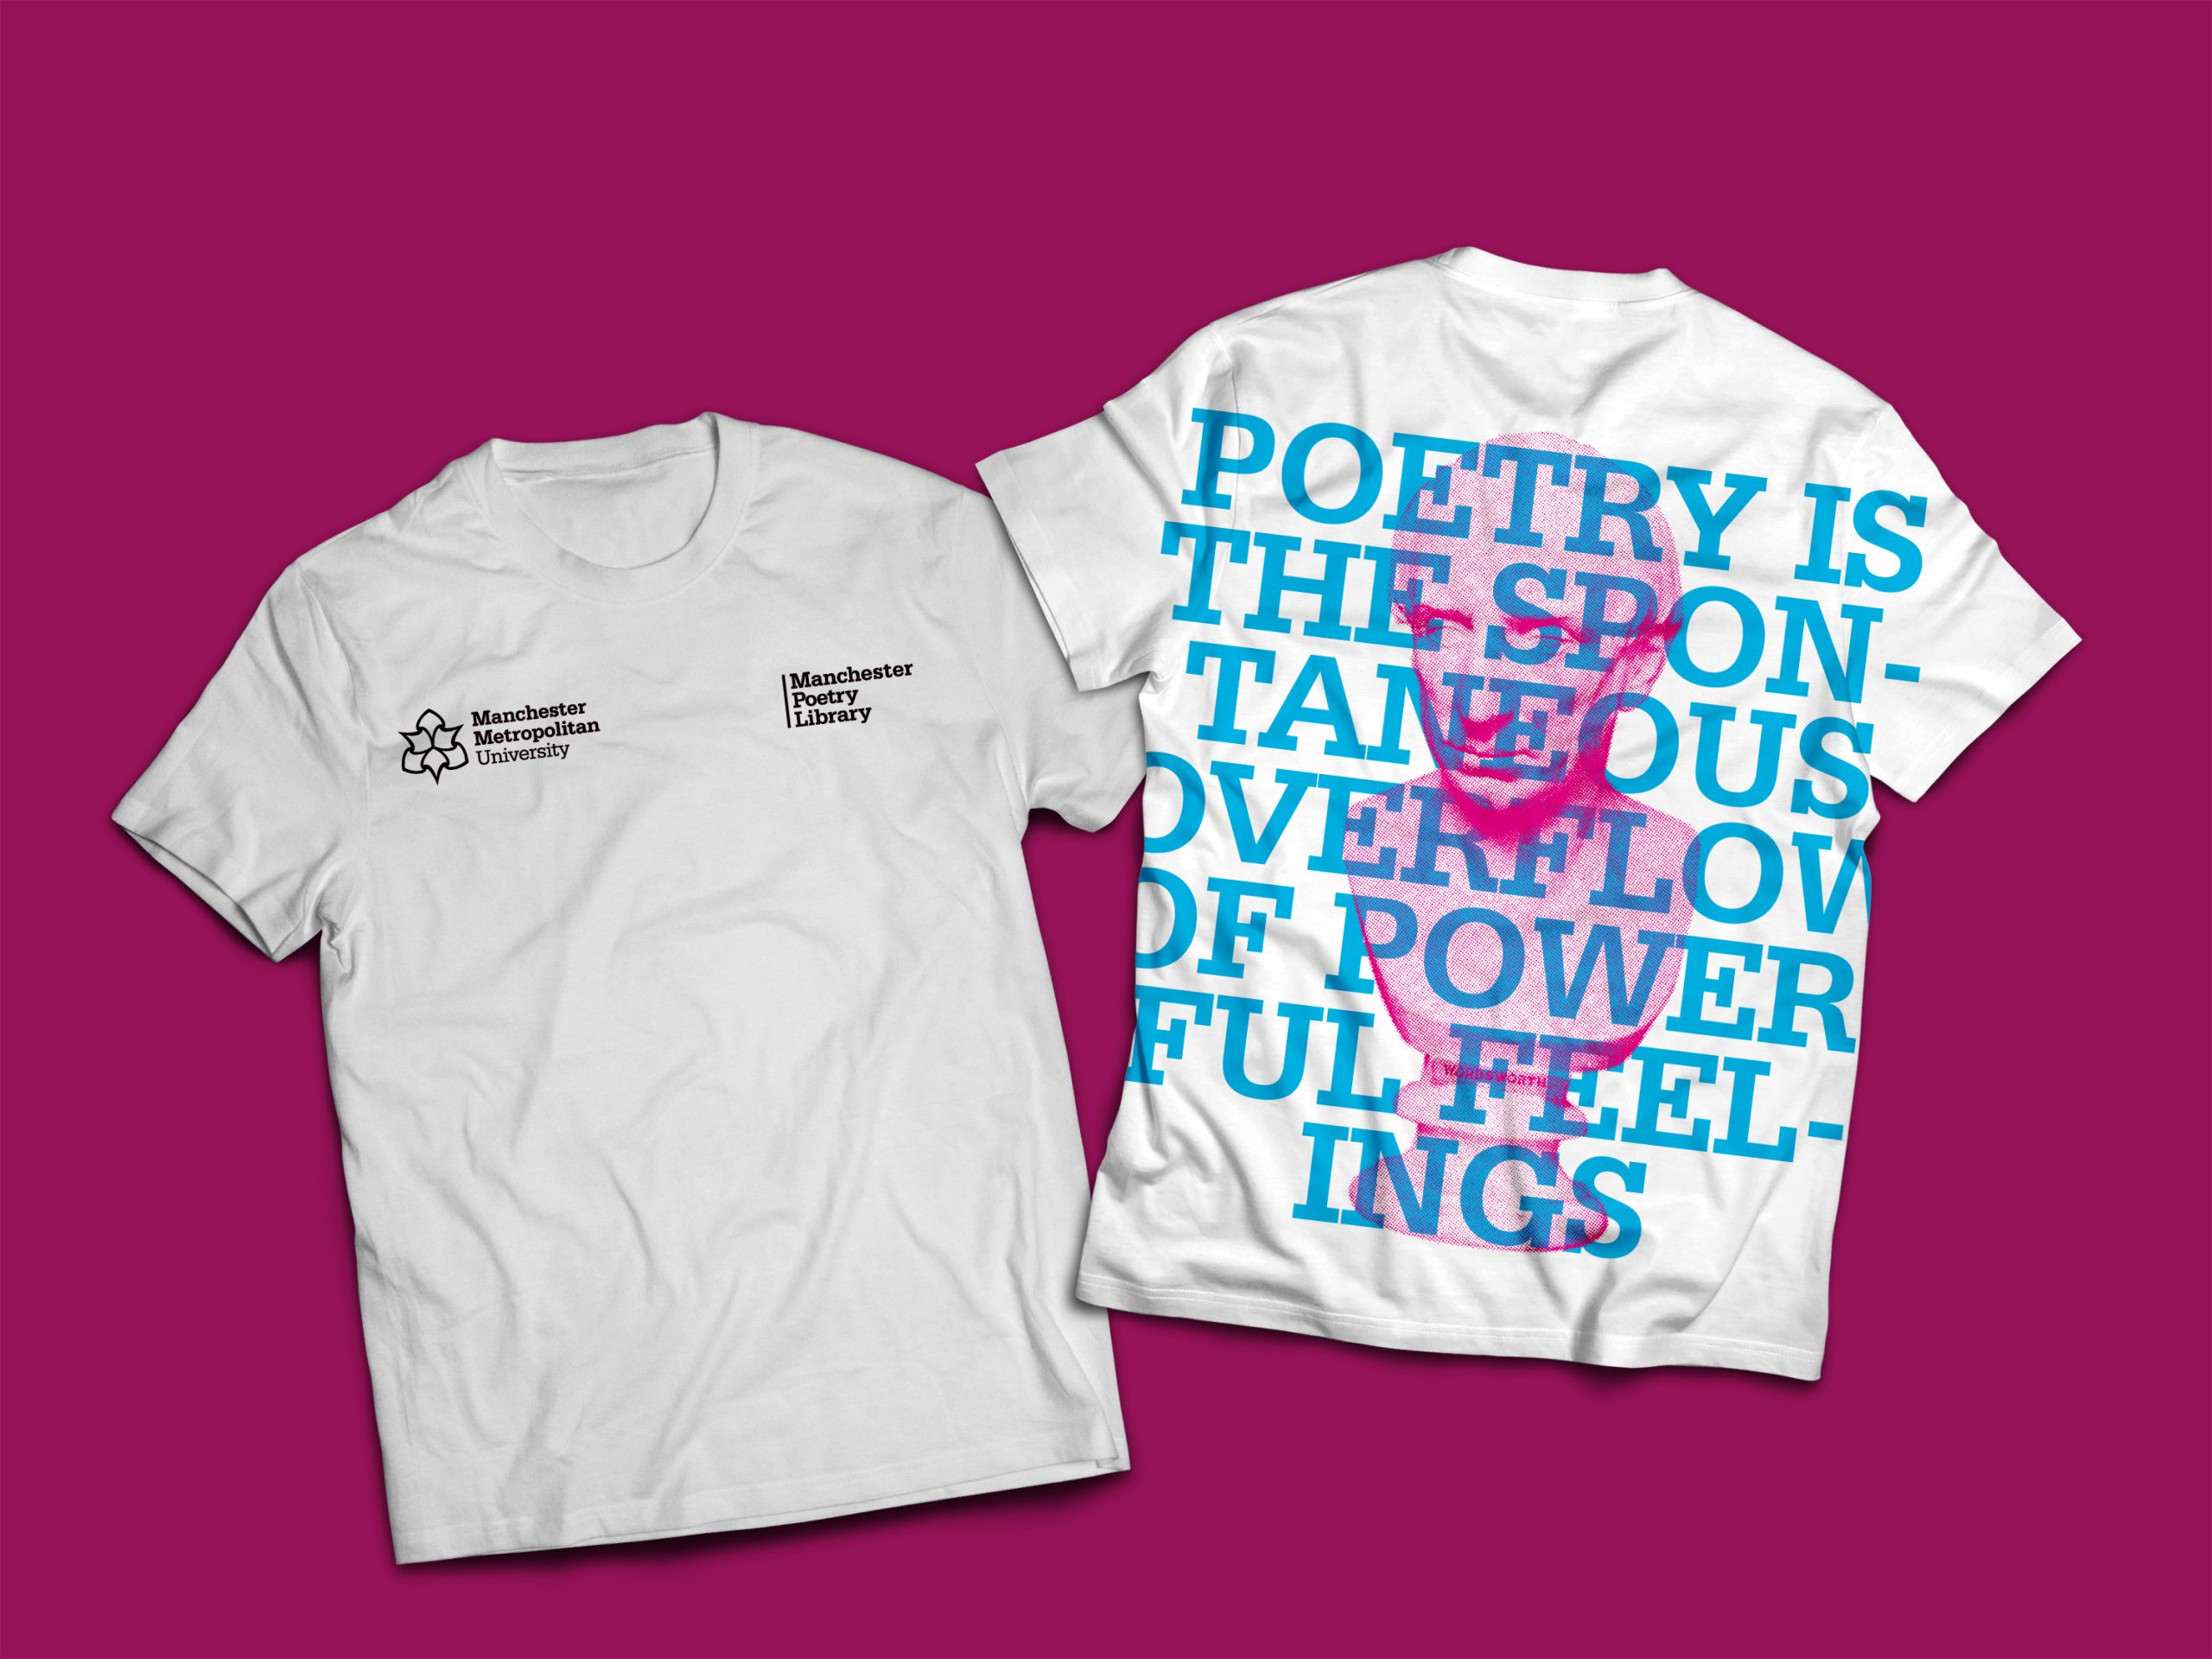 White tshirt front and back on pink background with print of pink bust of wordsworth and the words 'poetry is the spontaneous overflow of powerful feelings'